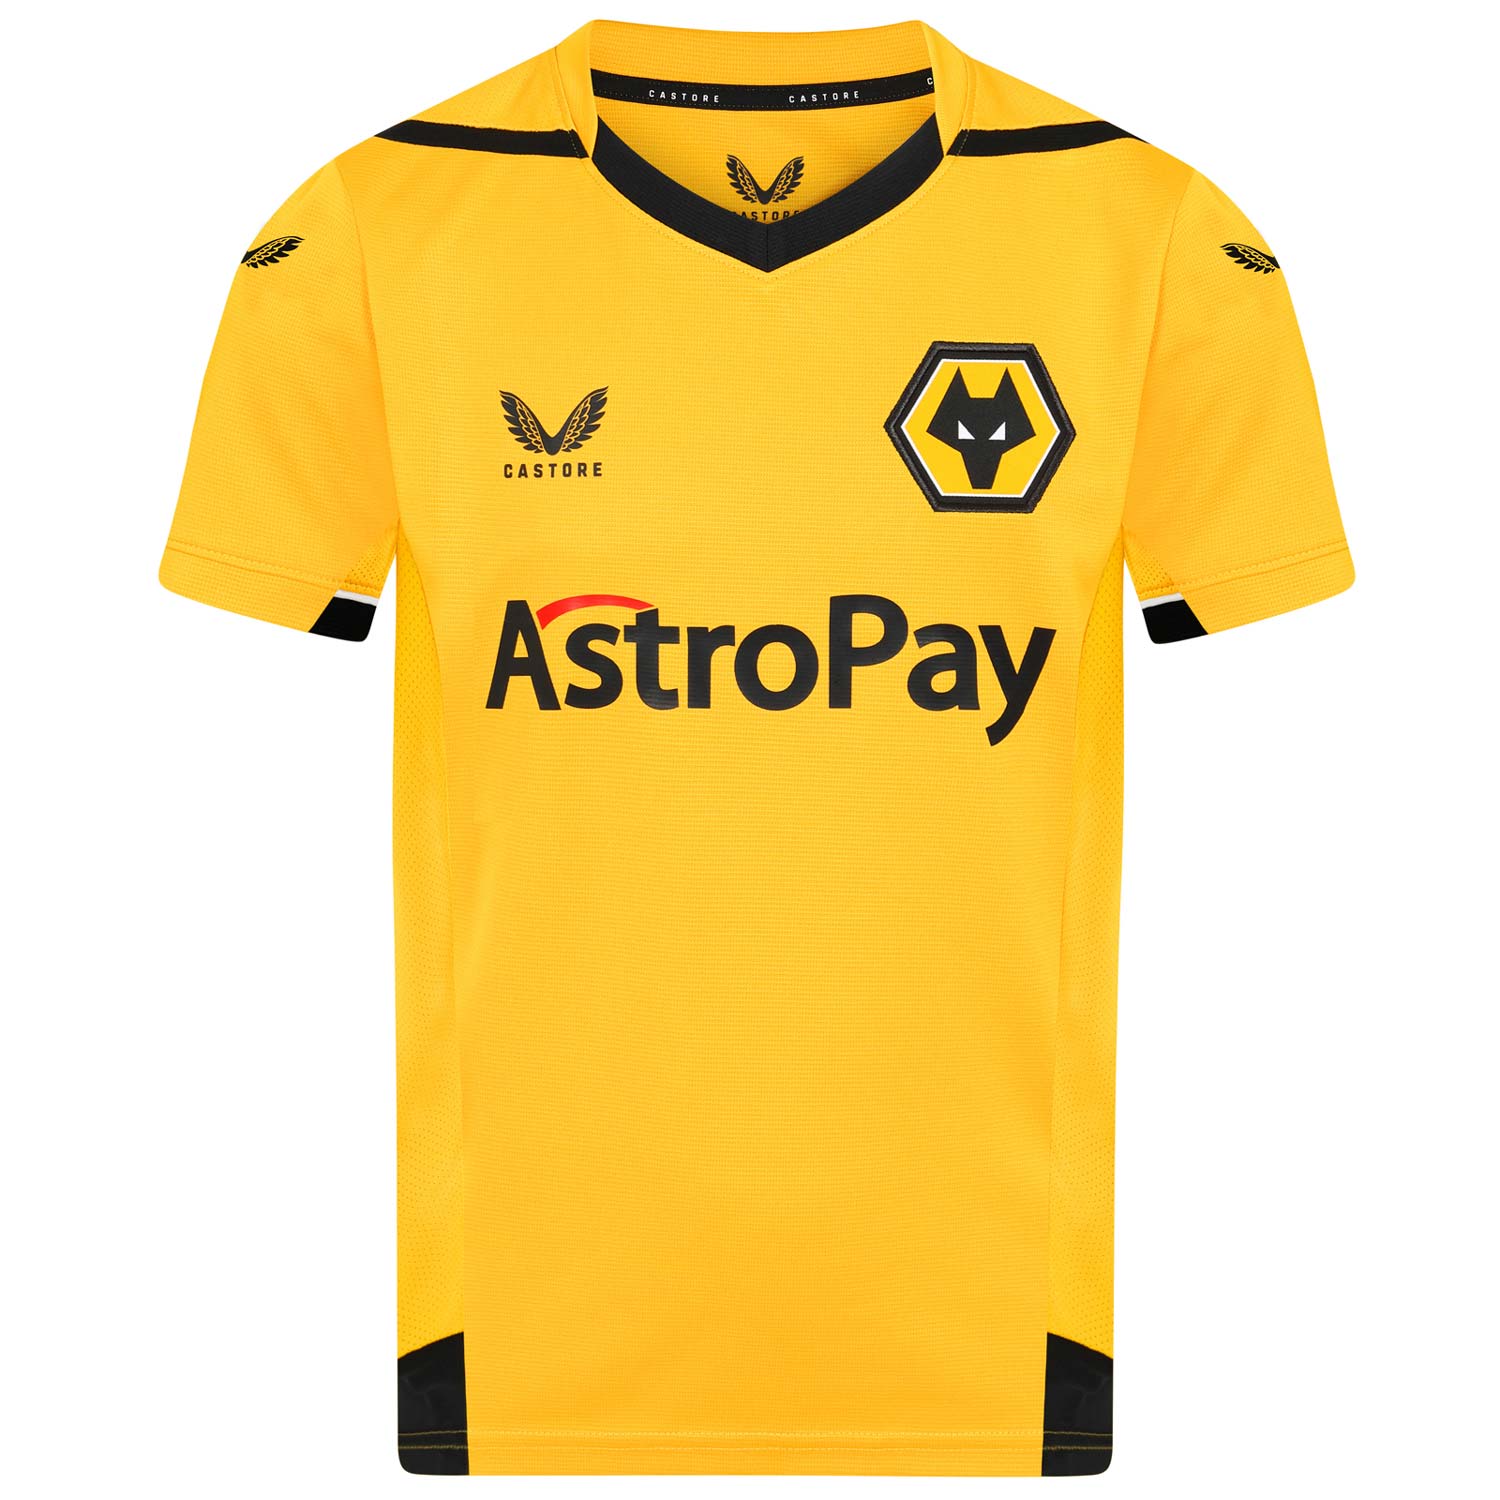 2022-23 Wolves Home Shirt - Junior
Be Part Of the Pack, with the 2022-23 Wolves Junior Home Shirt and show your pride on the street and in the stands.
Featuring detailed colour matching and dyeing to be true Wolves Gold and bring it back home to the club and fans.

Angular mesh inner sleeve and body panels for extra ventilation
Wolves back neck taping
Featuring our new club sponsor AstroPay on front of shirt
100% Polyester
